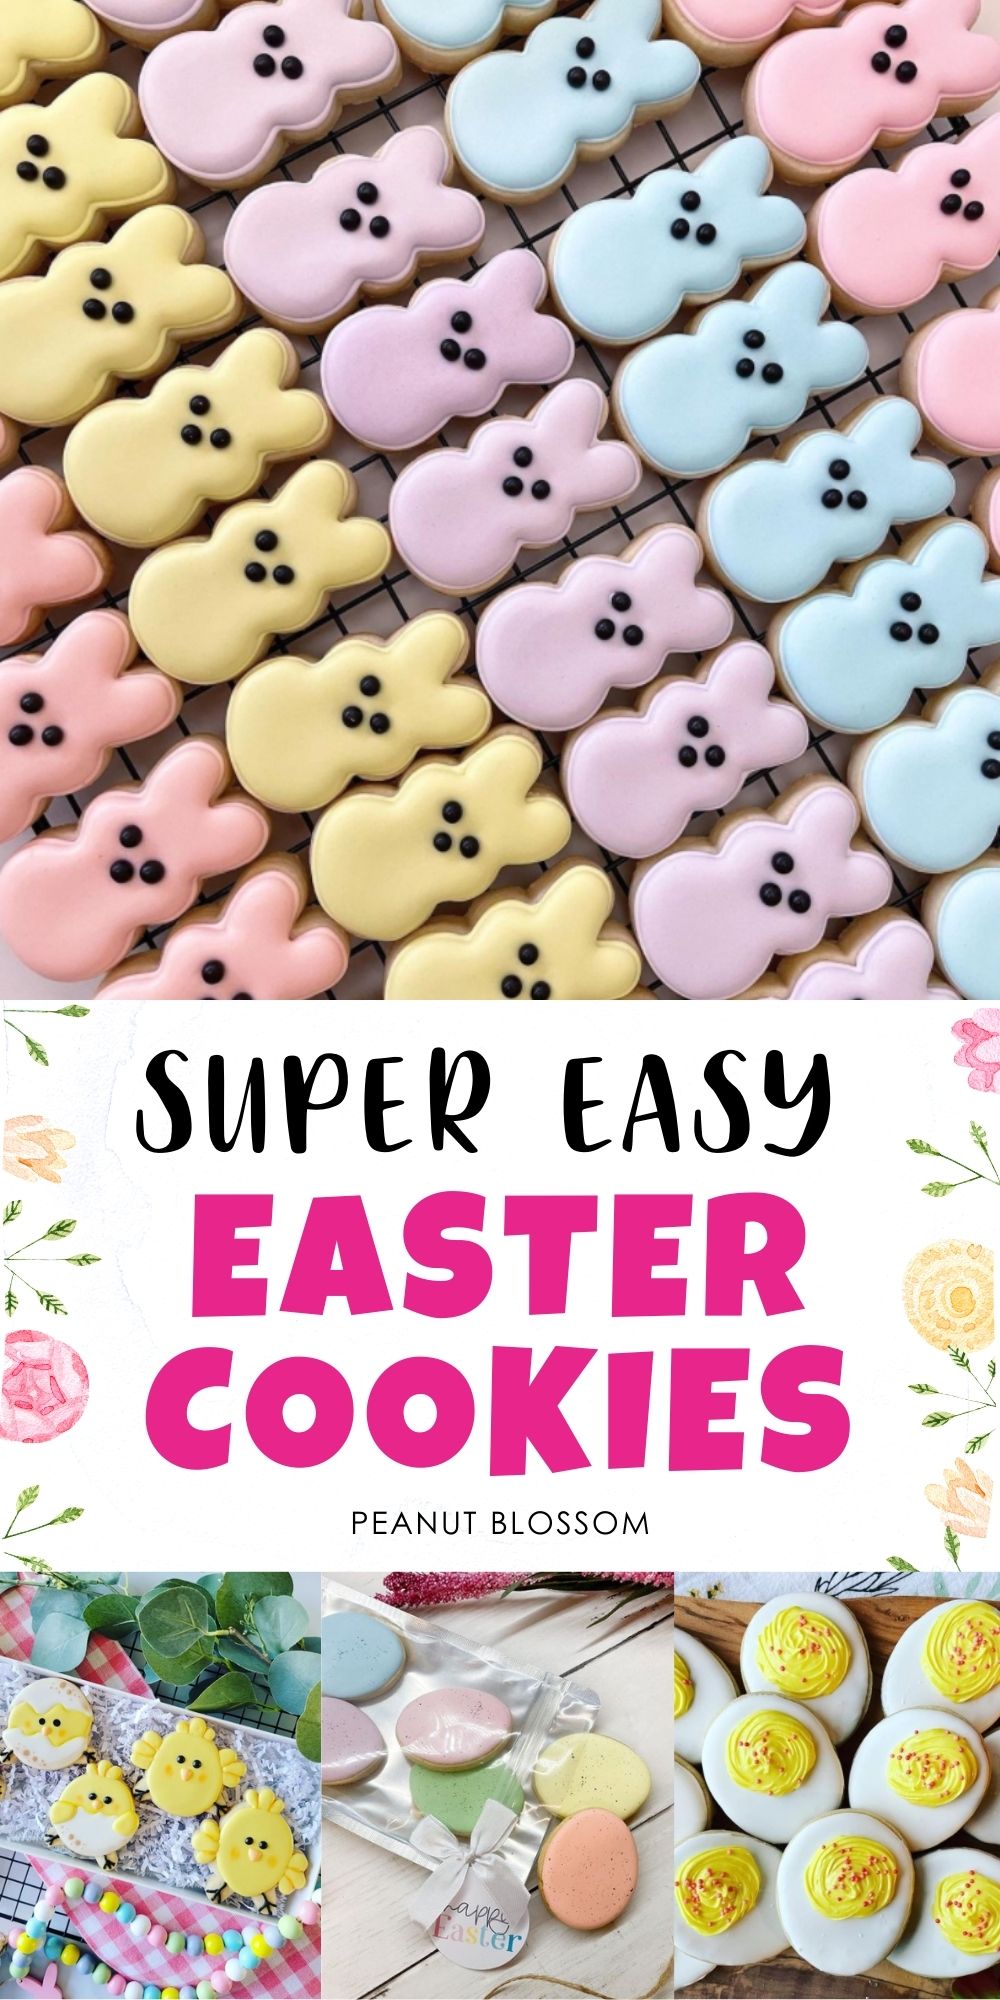 A photo collage show several easy Easter cookie designs.